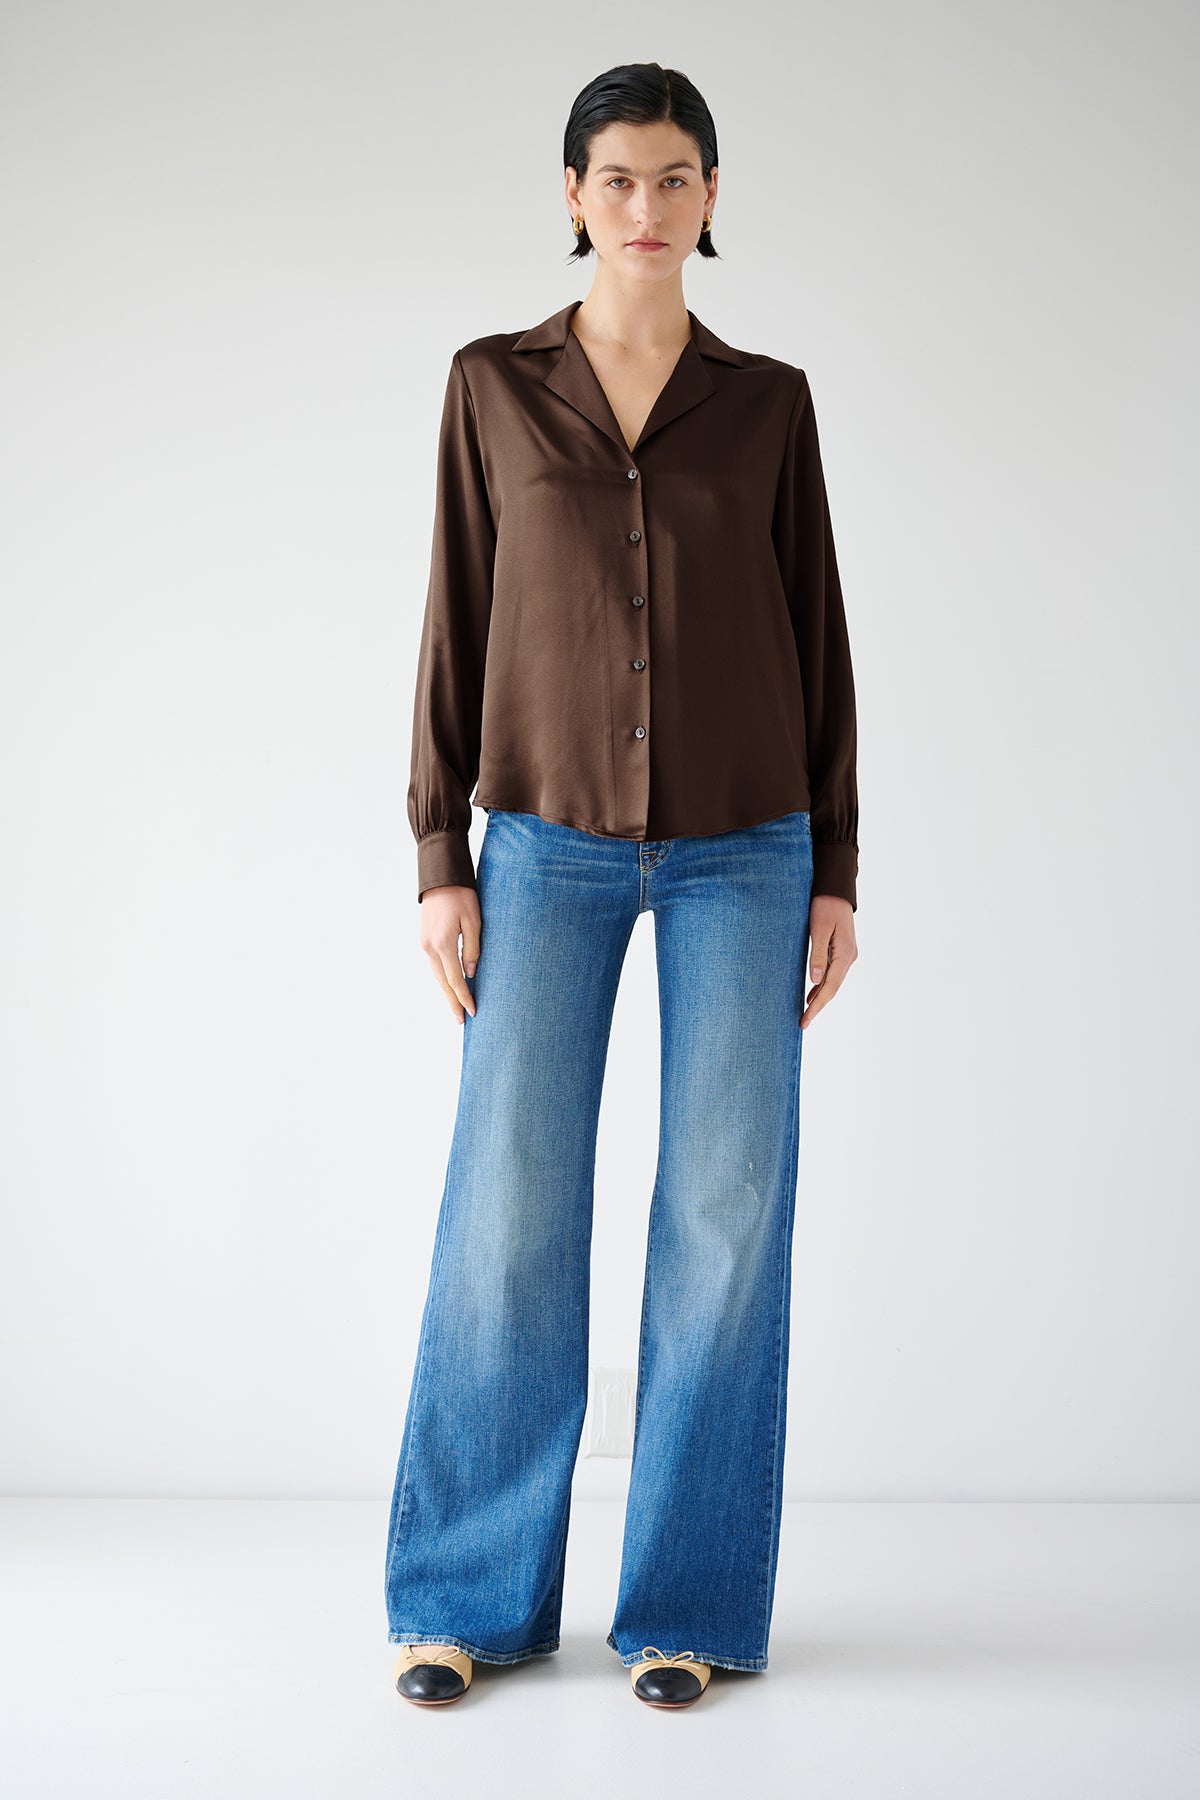 The model is wearing a timeless brown Silk Button-Up Blouse, the SOHO TOP by Velvet by Jenny Graham.-35547448770753